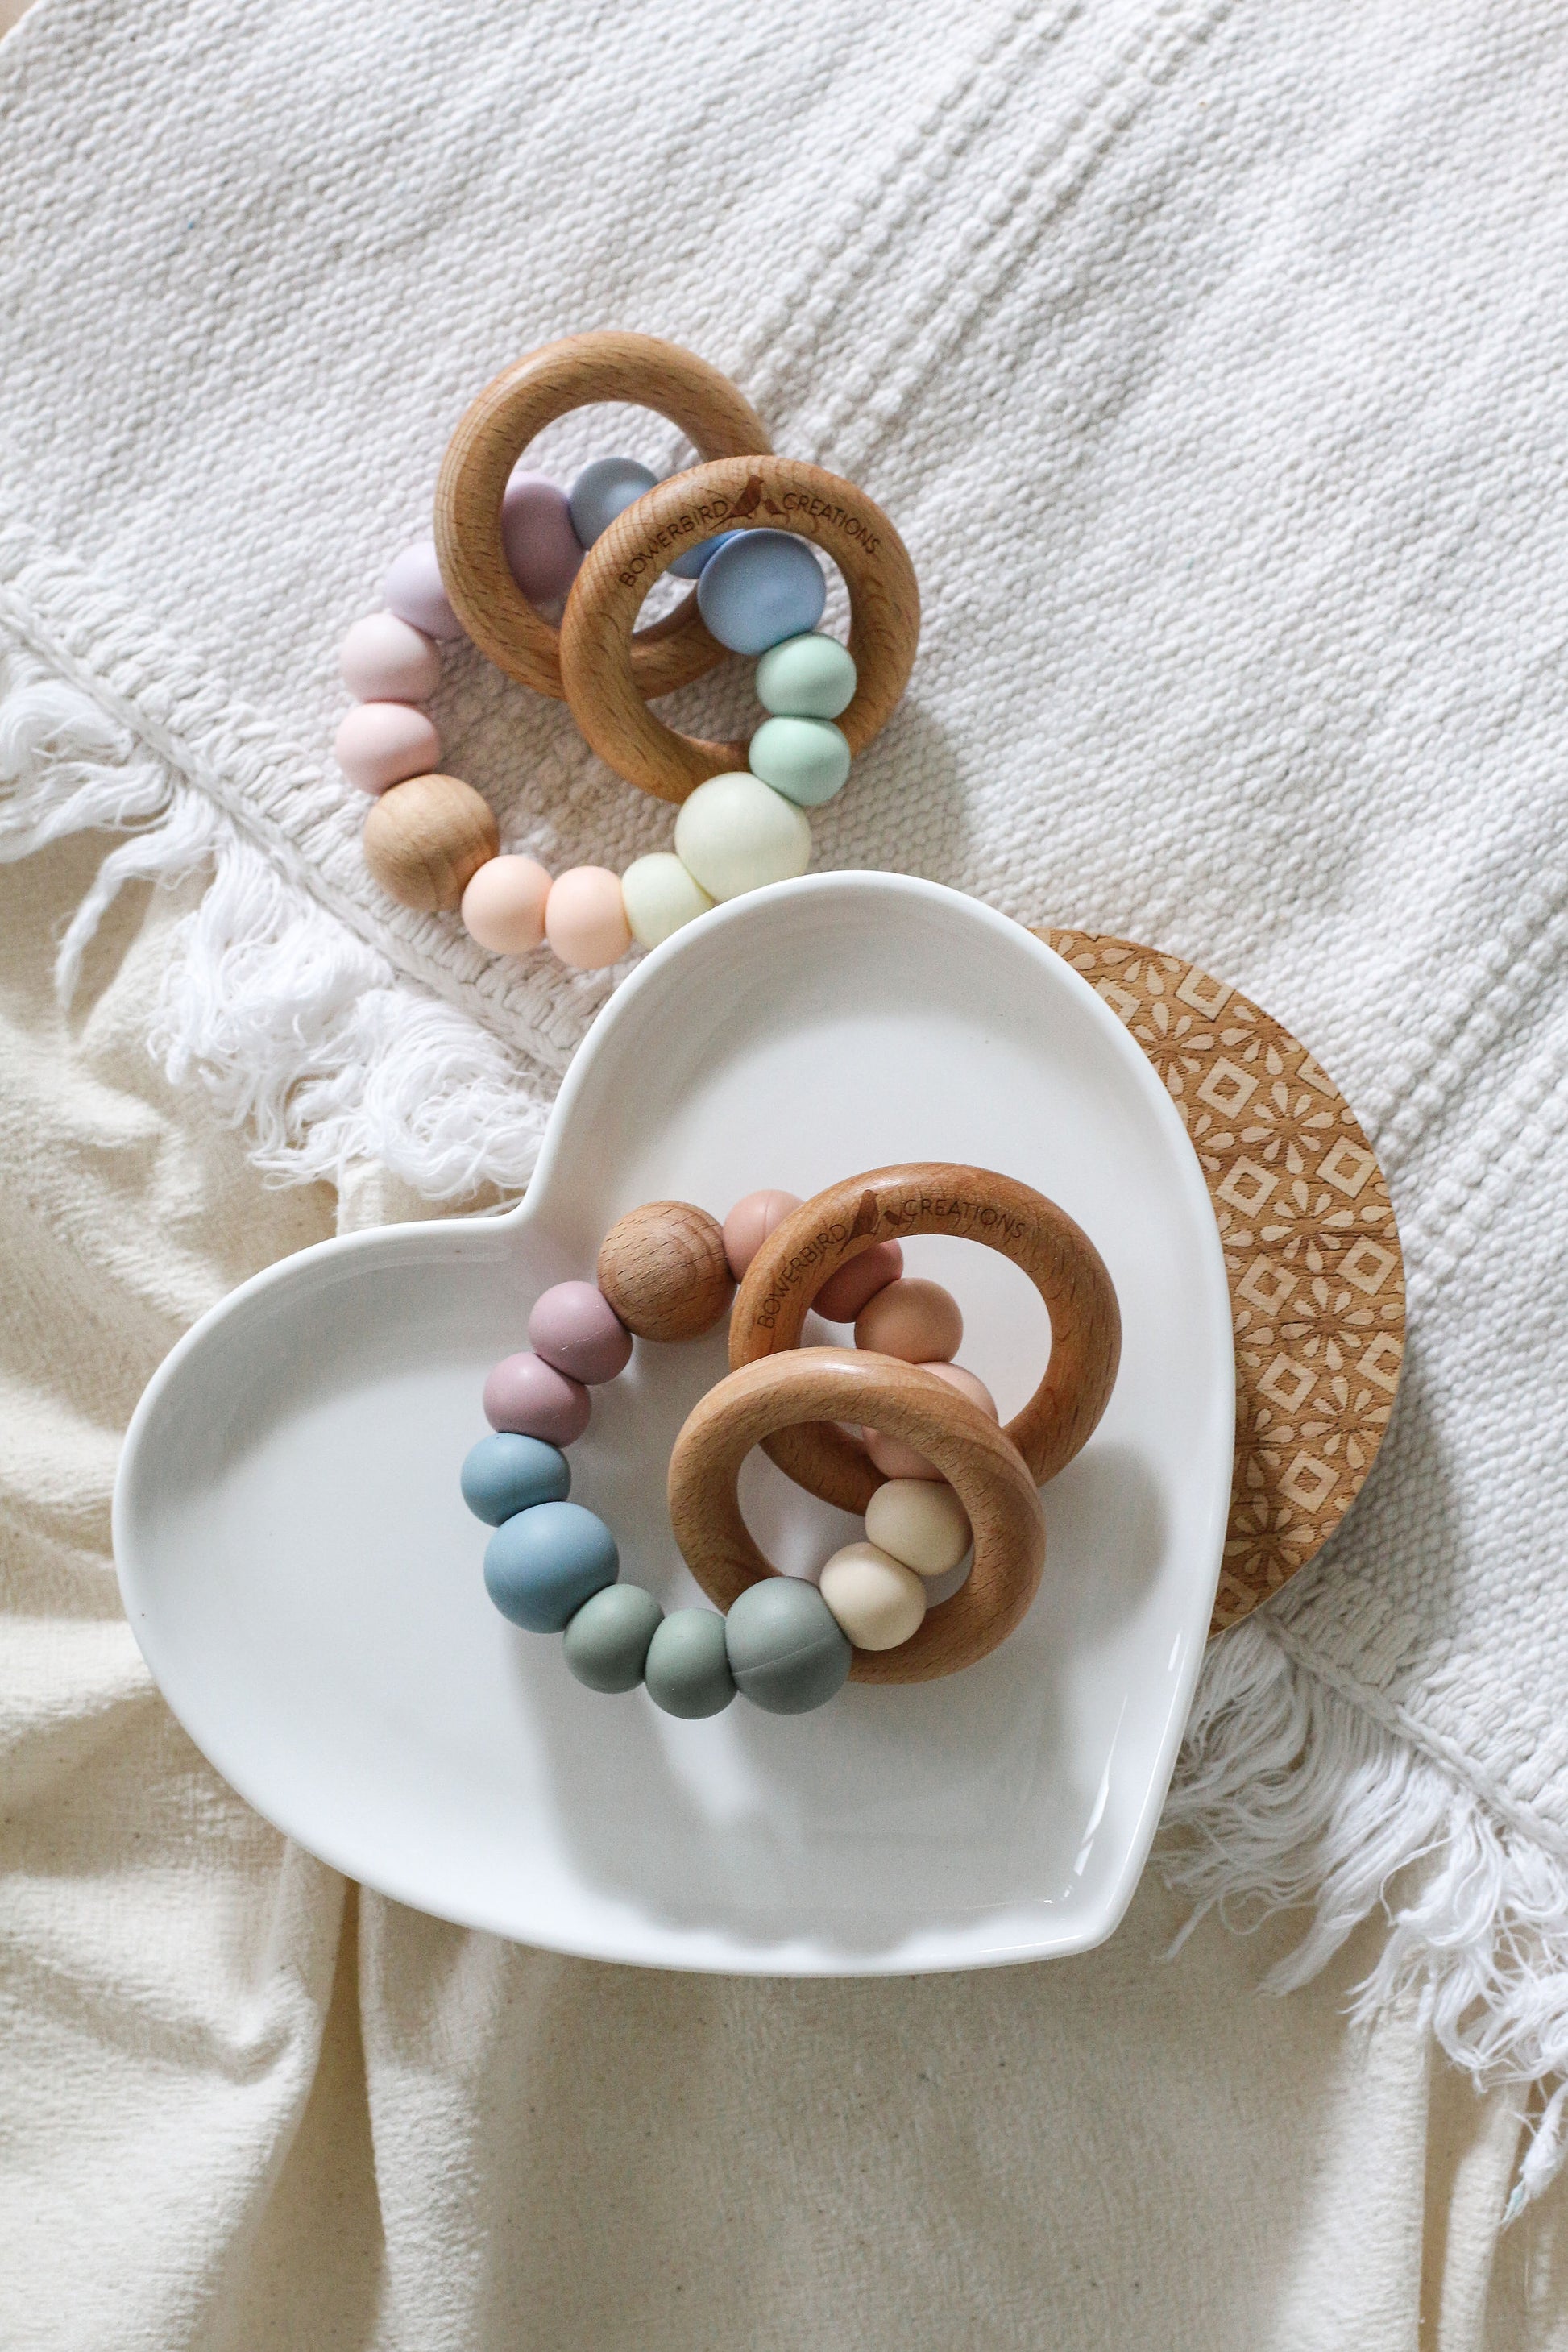 Teether/sensory toys featuring 2 wooden rings that rattle. Handmade from silicone and natural wood. Pastel and muted rainbow.